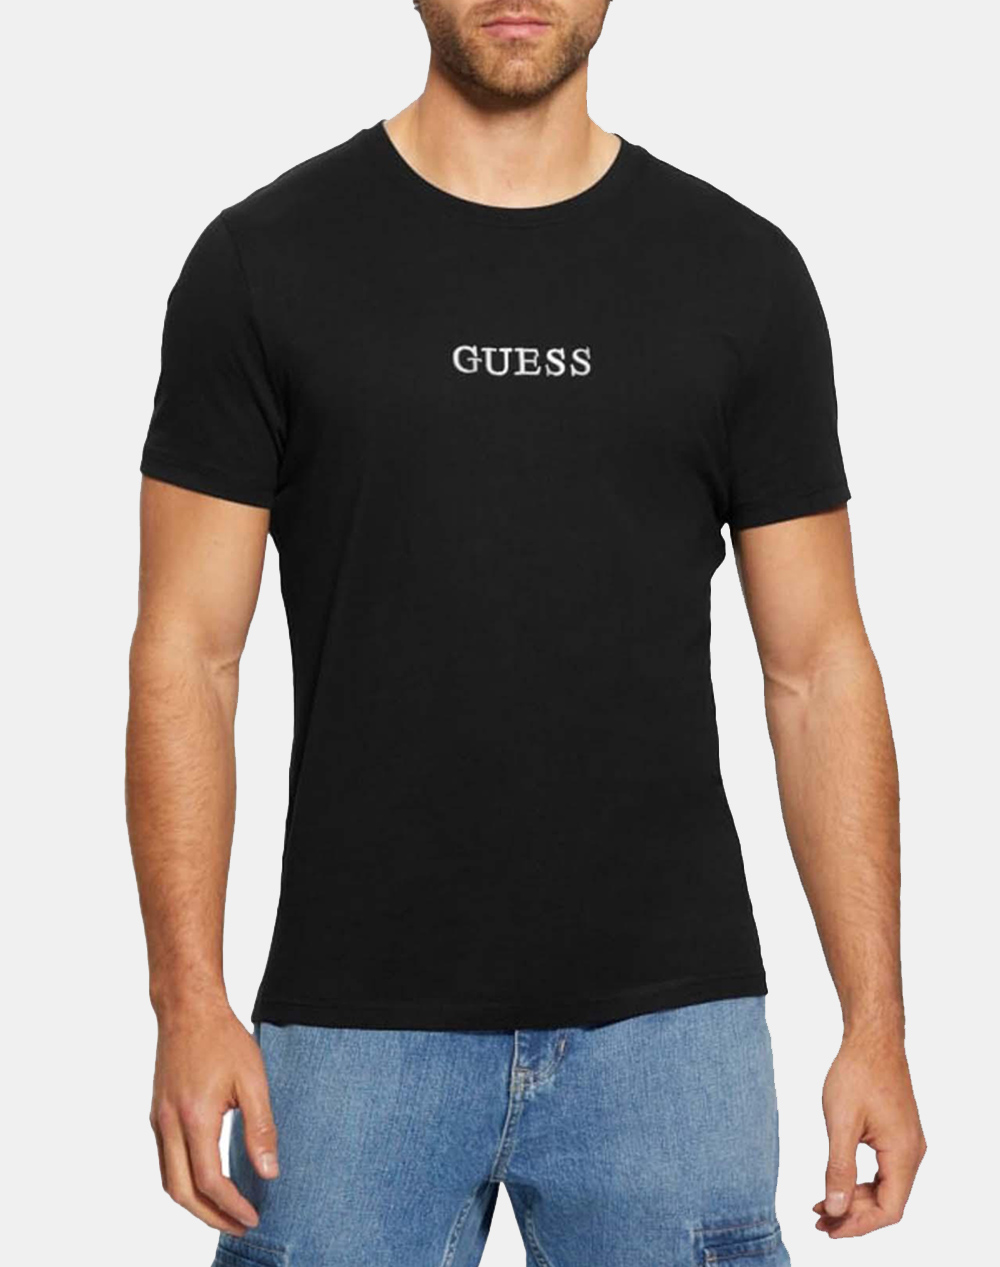 GUESS SS CN GUESS MULTICOLOR TEE ΜΠΛΟΥΖΑ ΑΝΔΡΙΚΟ M4GI92I3Z14-JBLK Black 3820AGUES3400074_6690